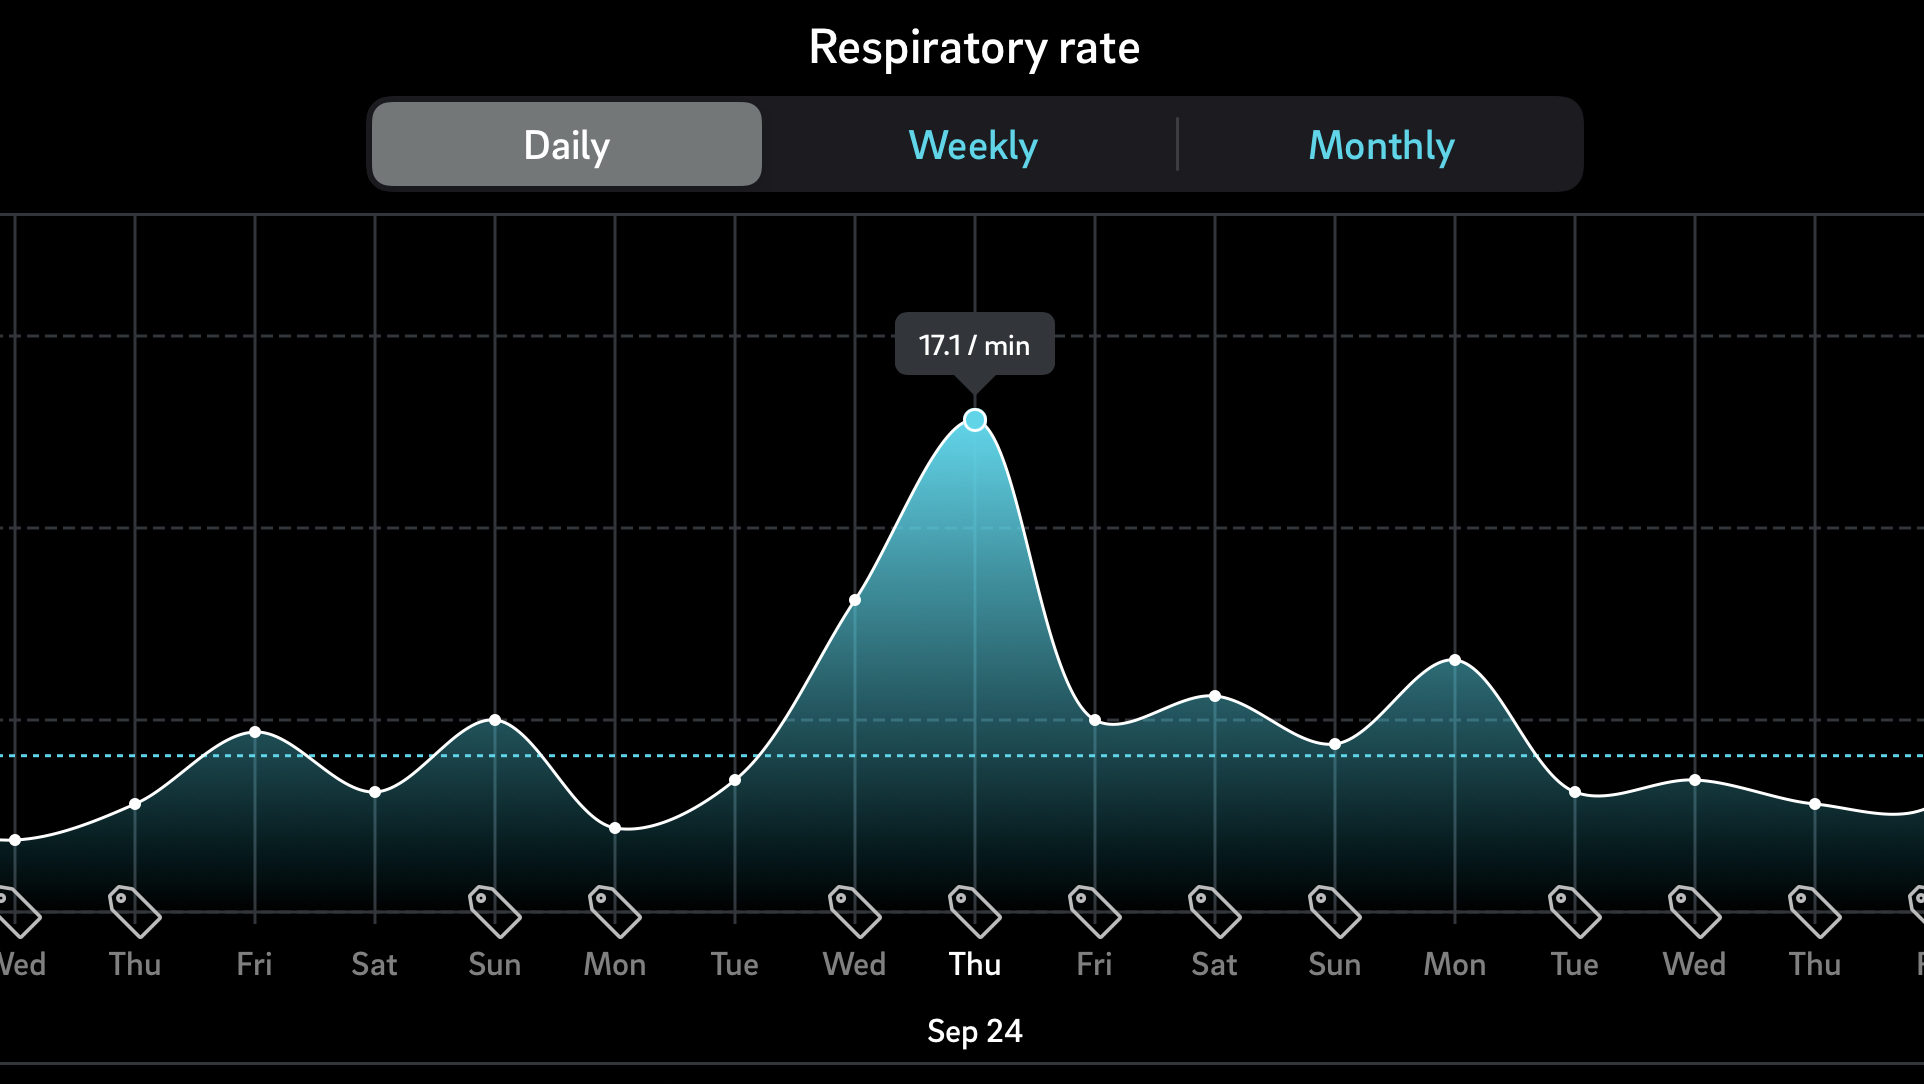 Graph showing spike in respiration rate during covid-19 virus